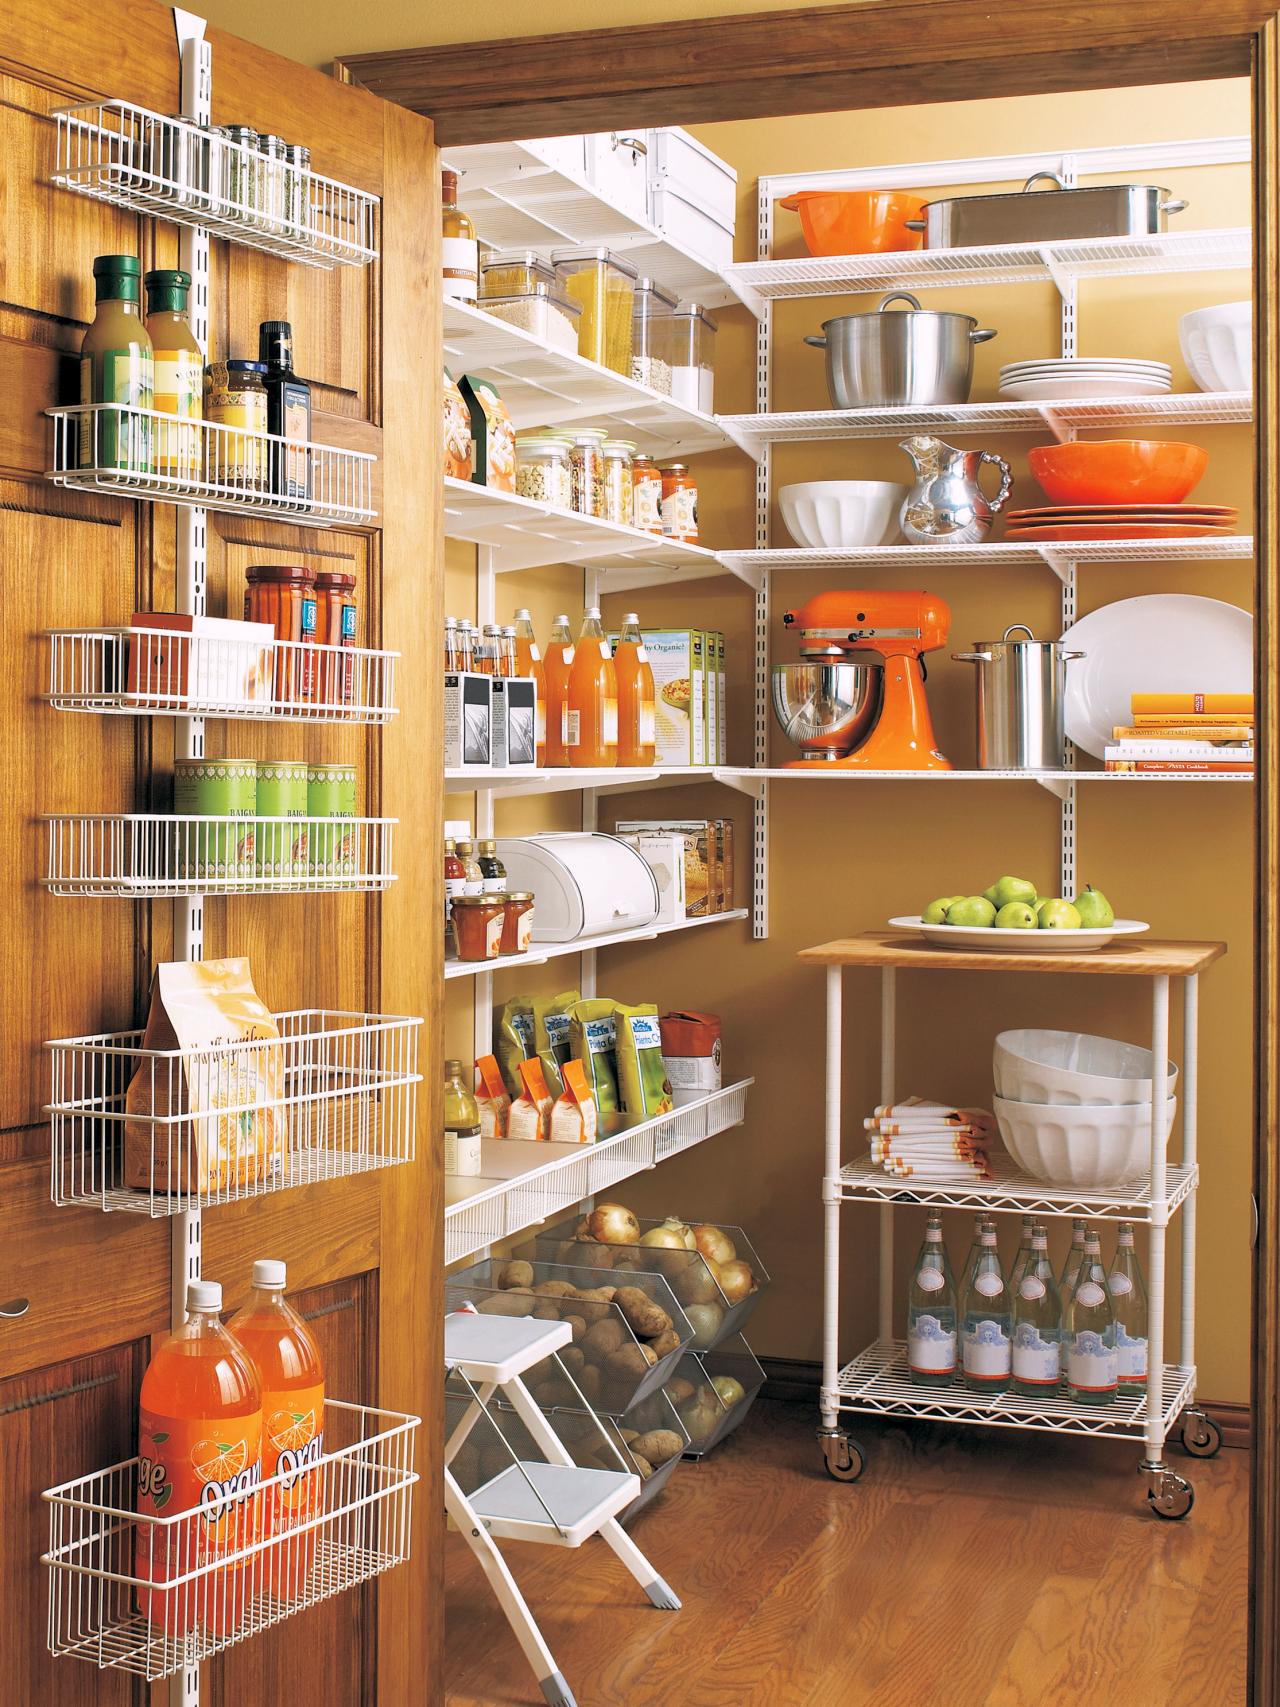 Dont Let Door Space Go To Waste. Attach Hanging Shelves For Extra Storage. 